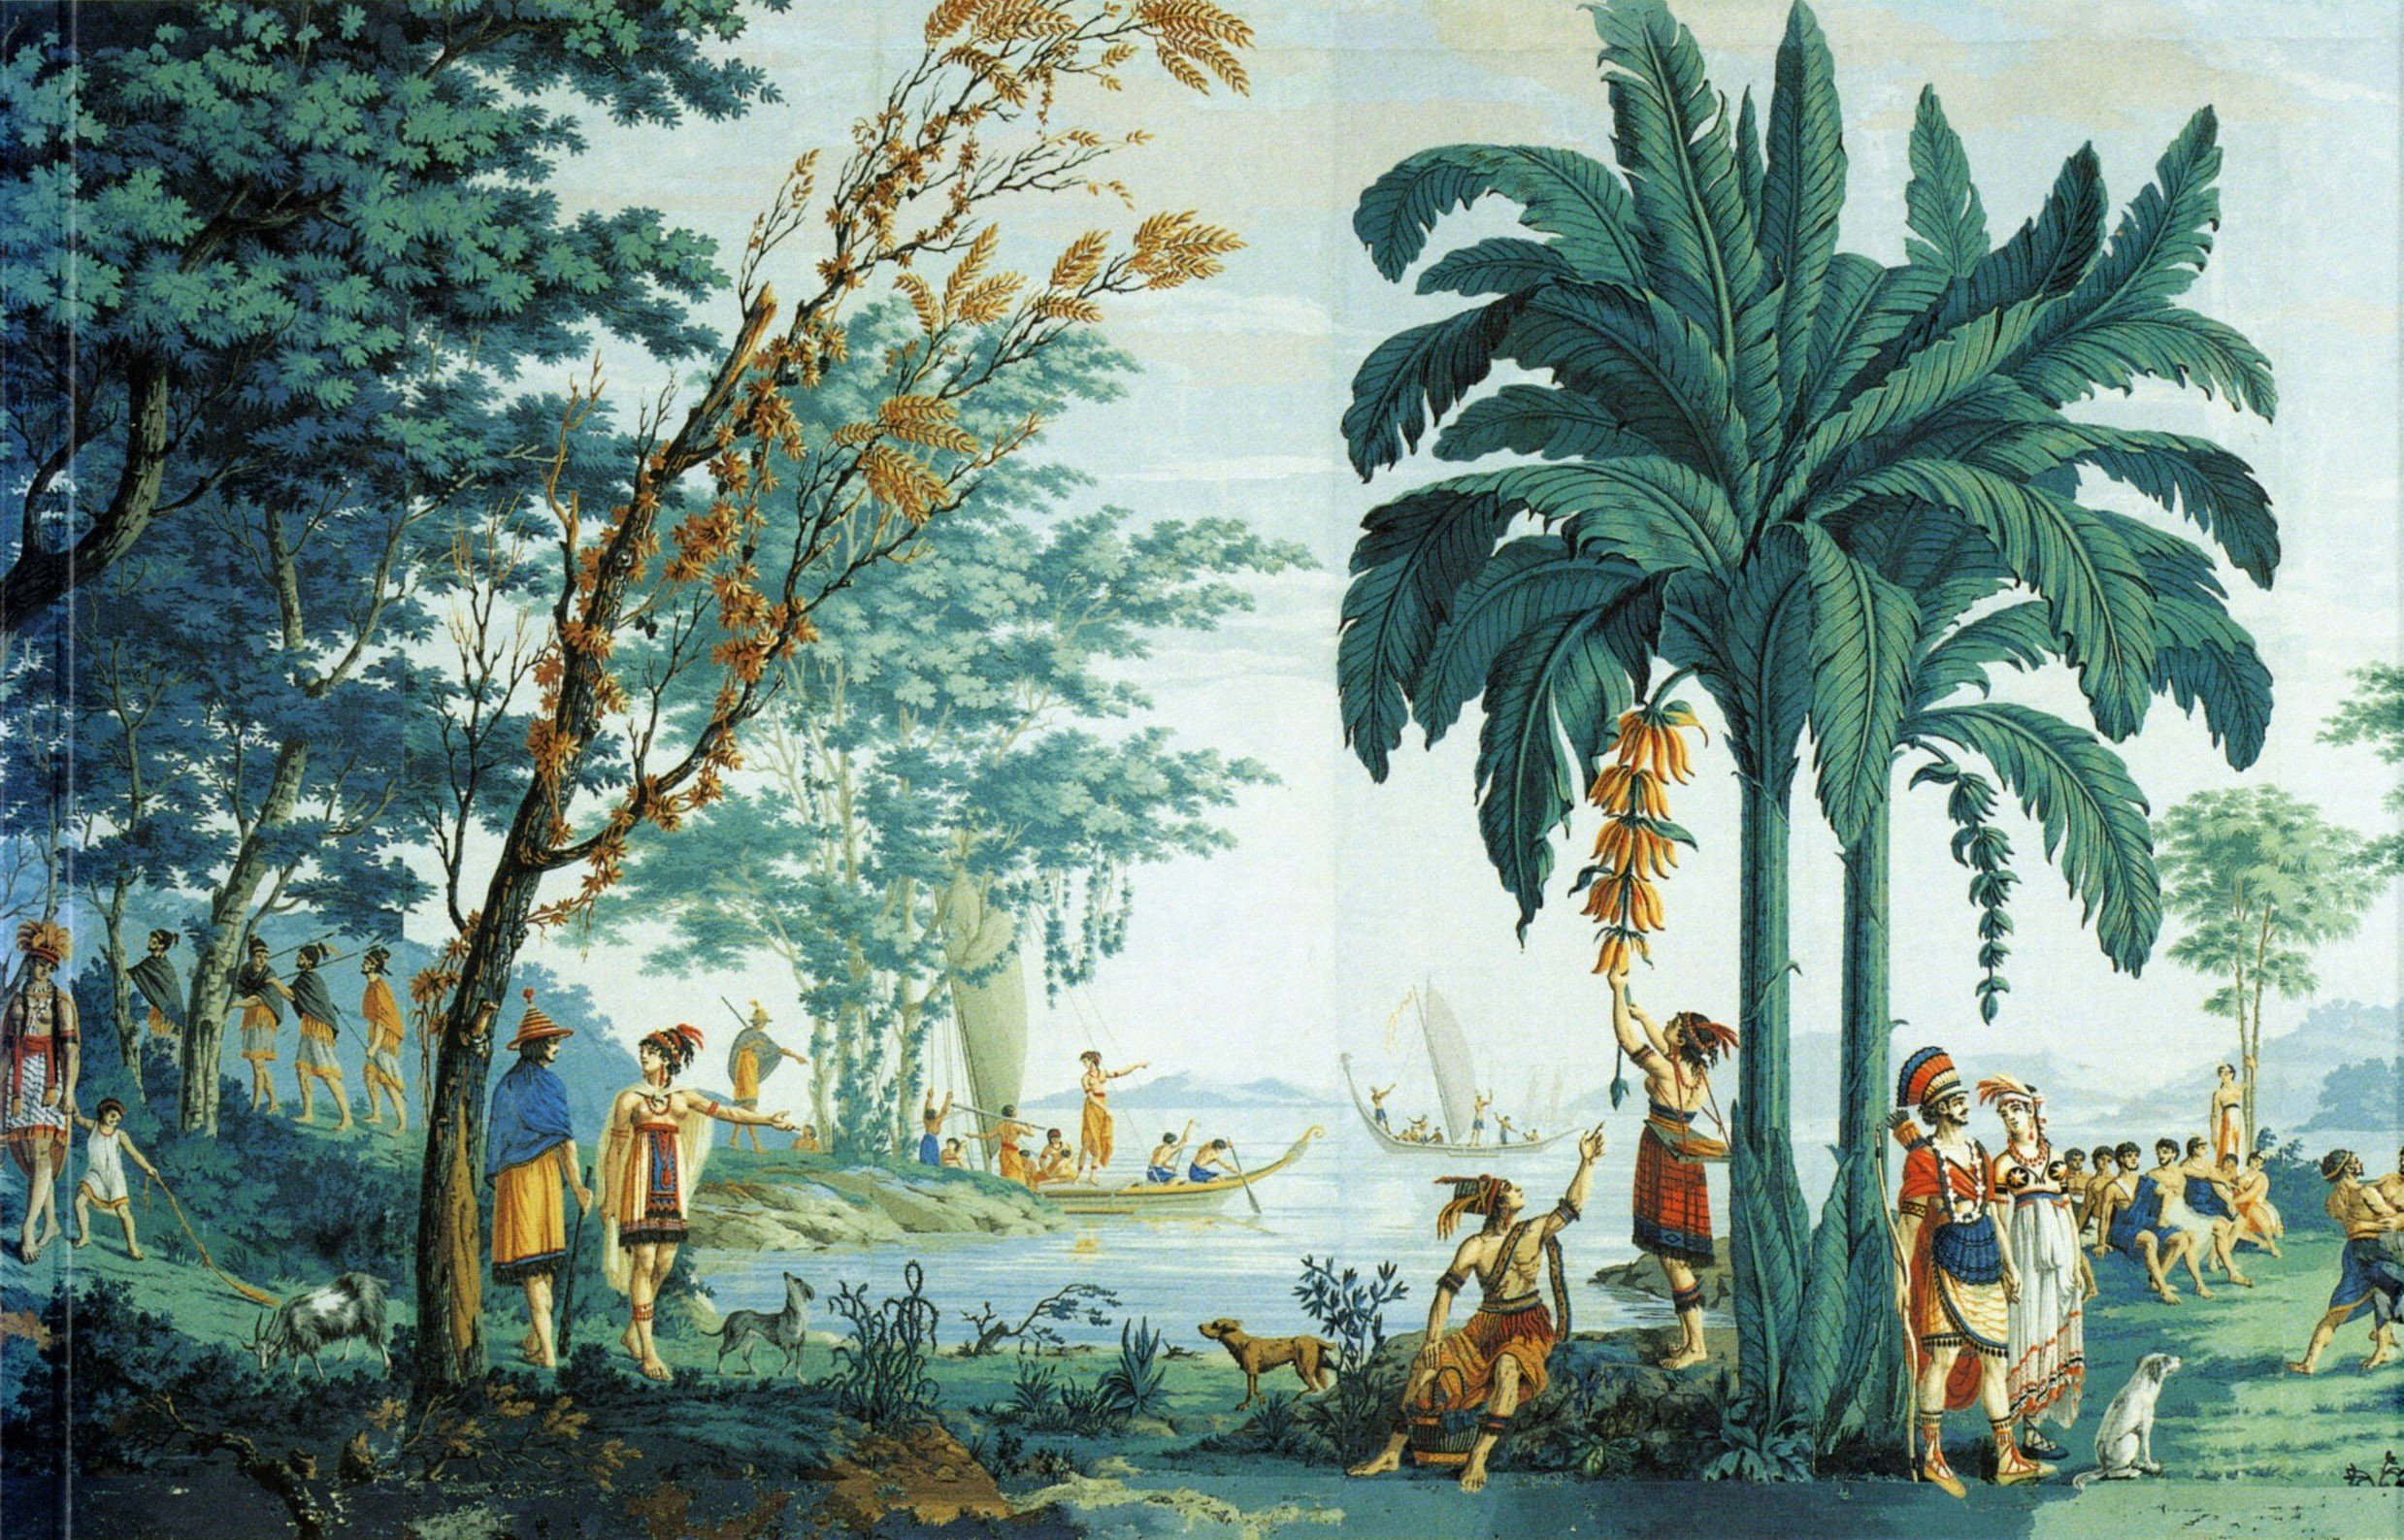 image of Pacific peoples in 18th century books, prints and wallpaper